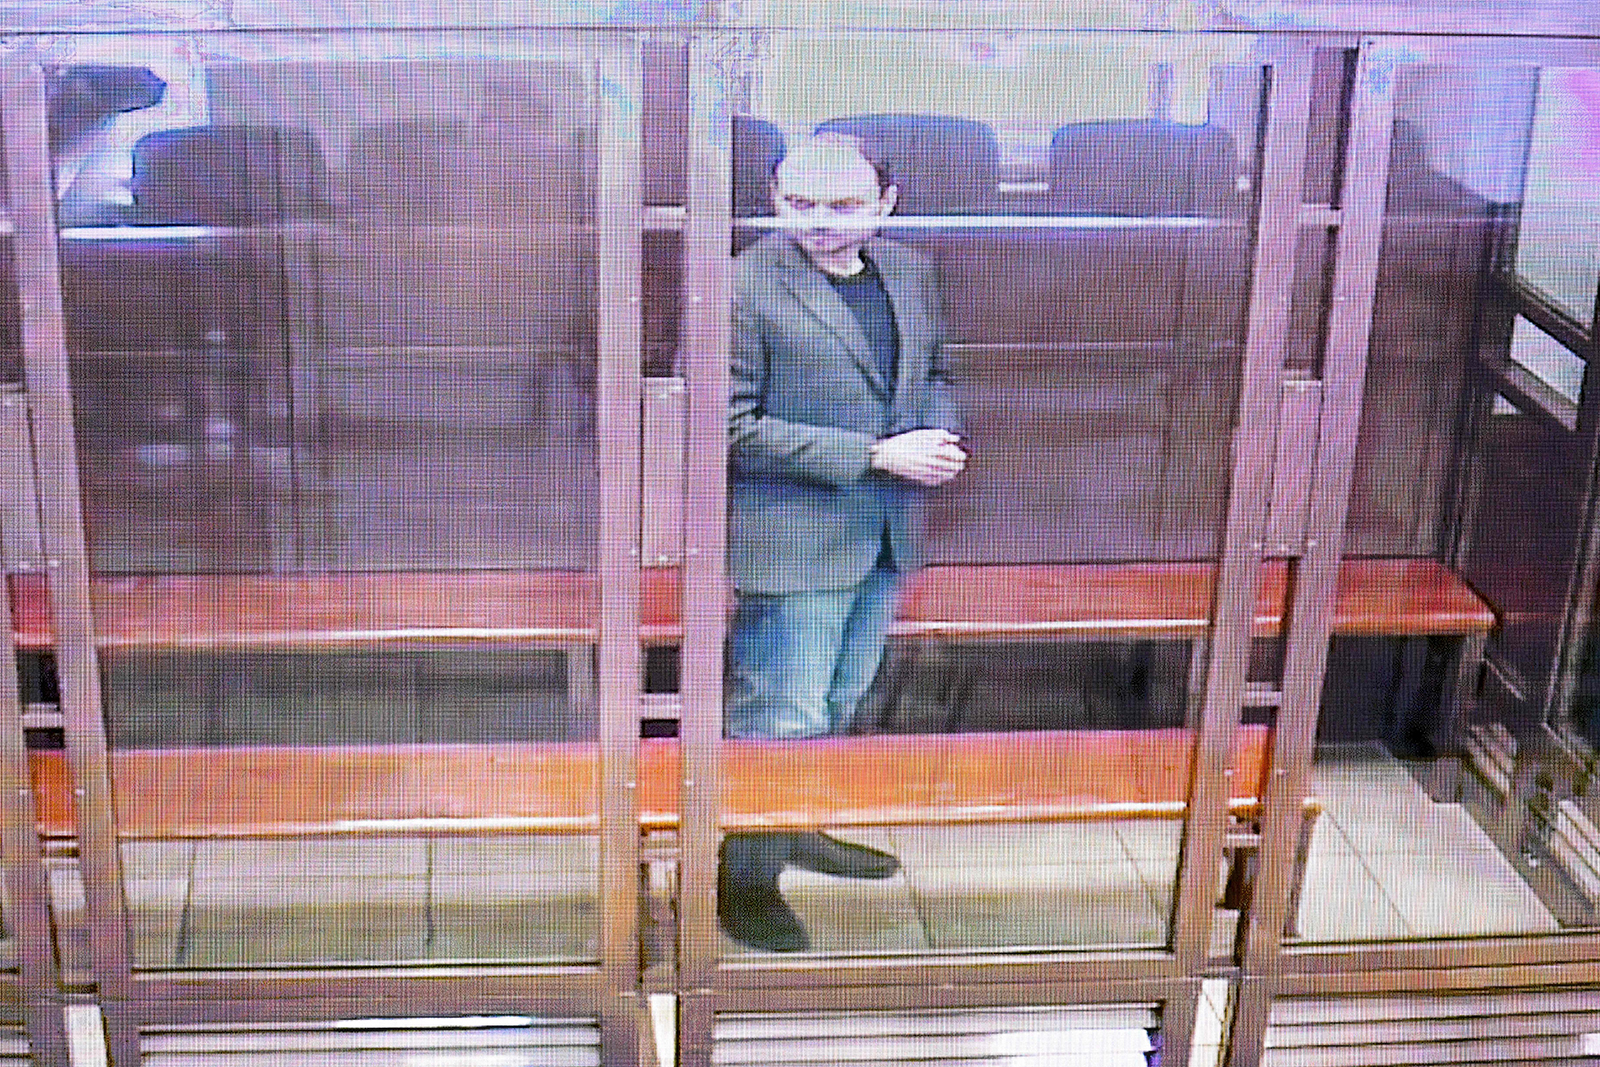 A screen set up at a hall of the Moscow City Court shows live feed of the verdict in the case against Vladimir Kara-Murza in Moscow on April 17.